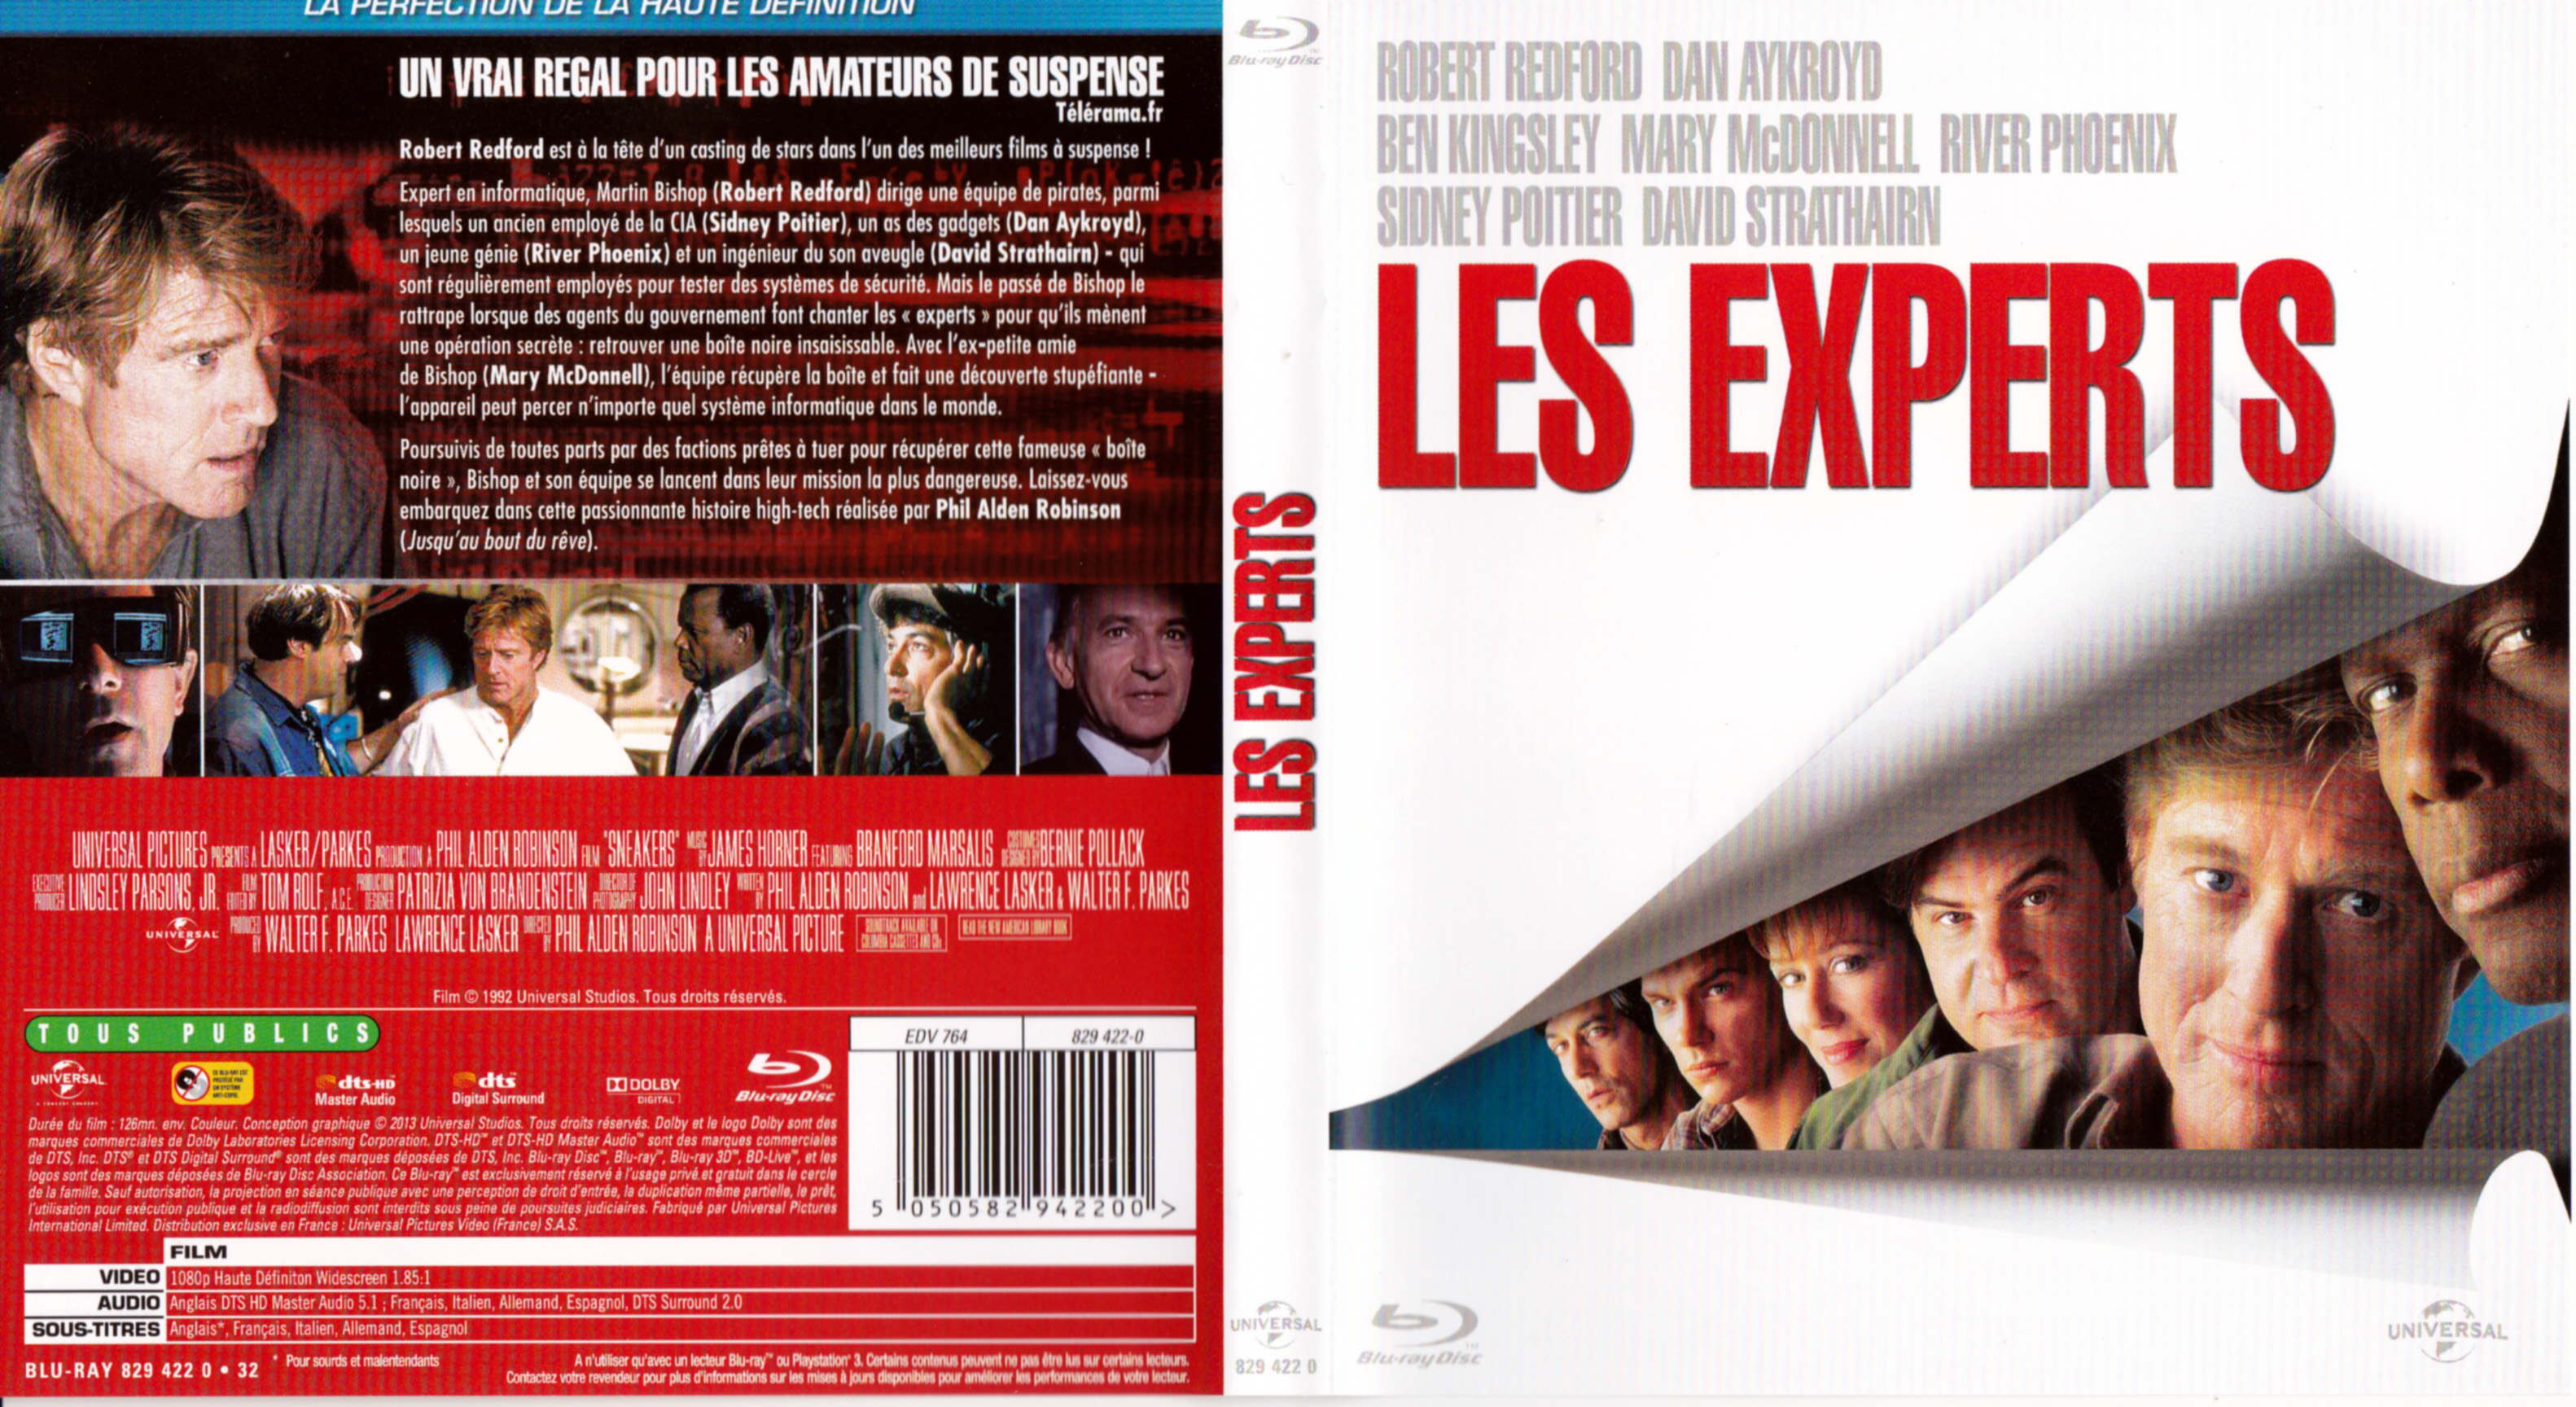 Jaquette DVD Les experts (BLU-RAY)